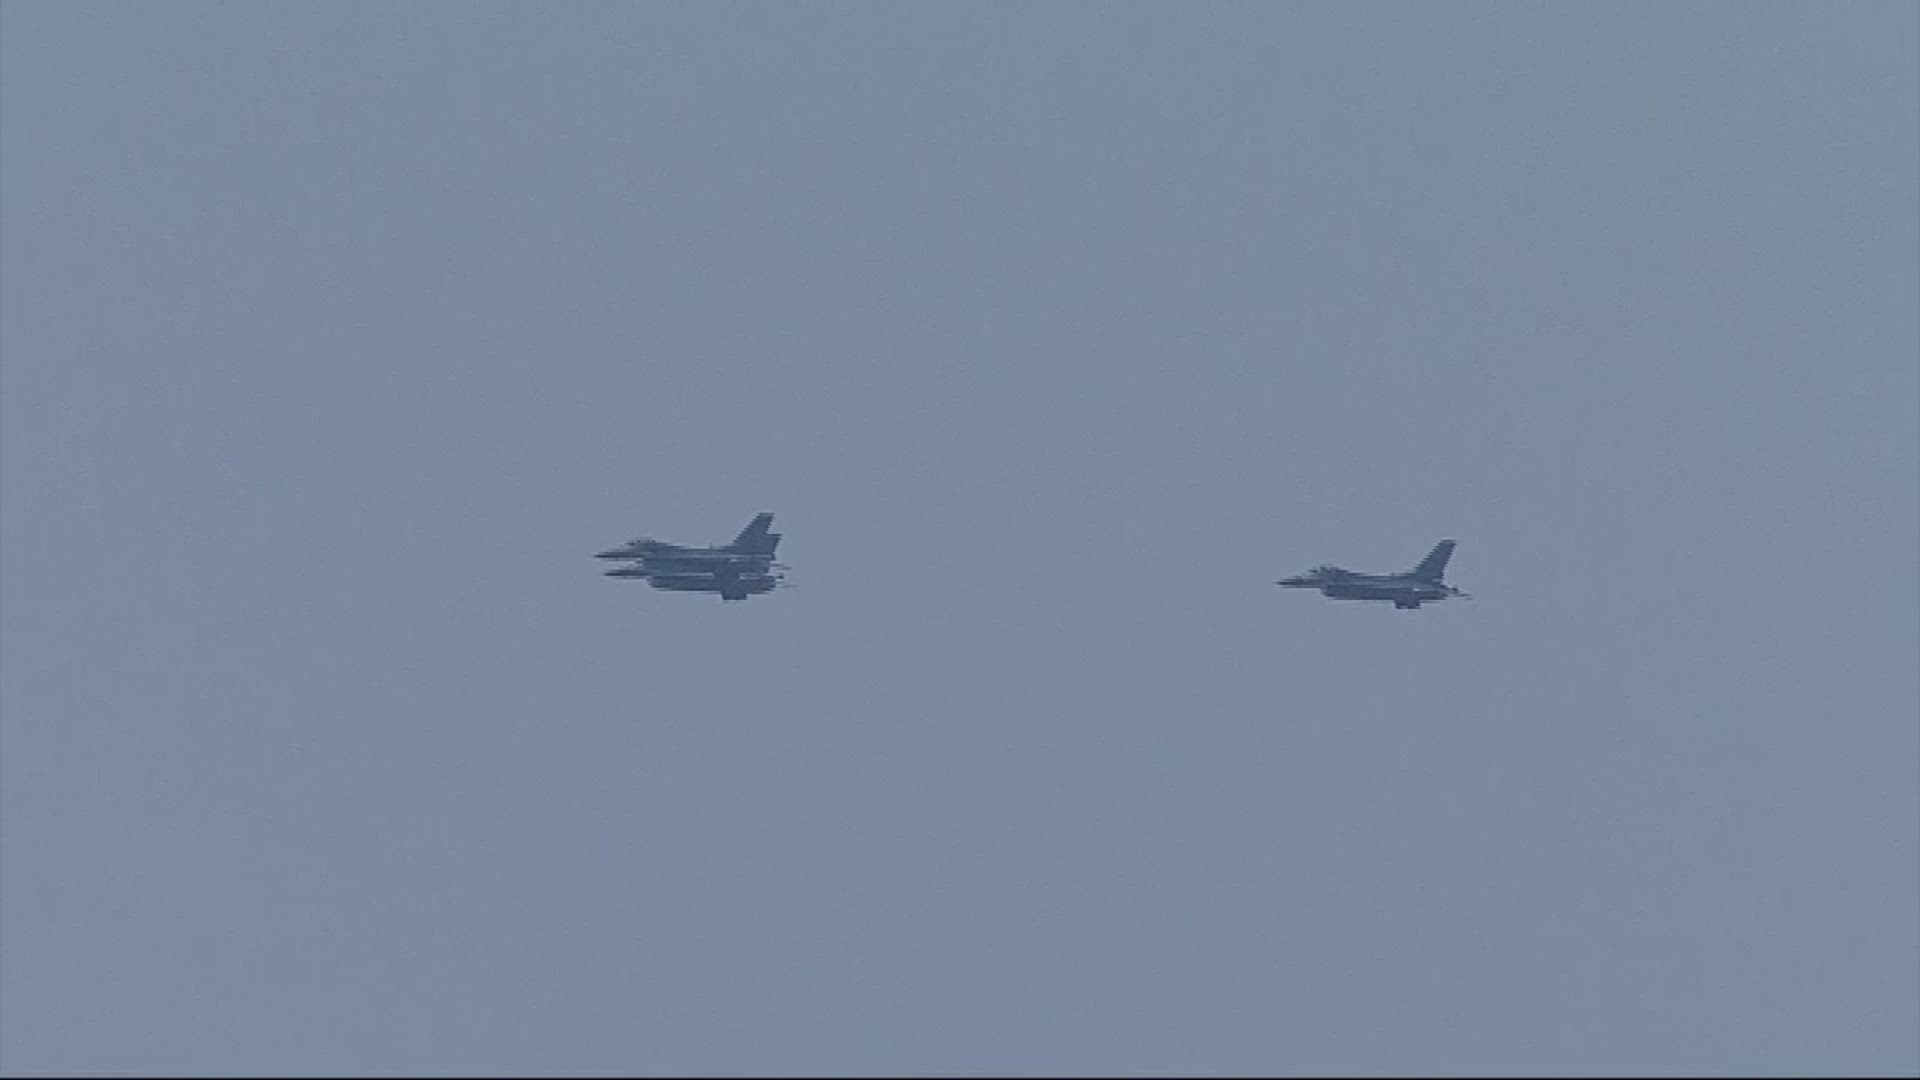 Air Force F-16's performed a missing man formation flyover of H. Ross Perot's memorial